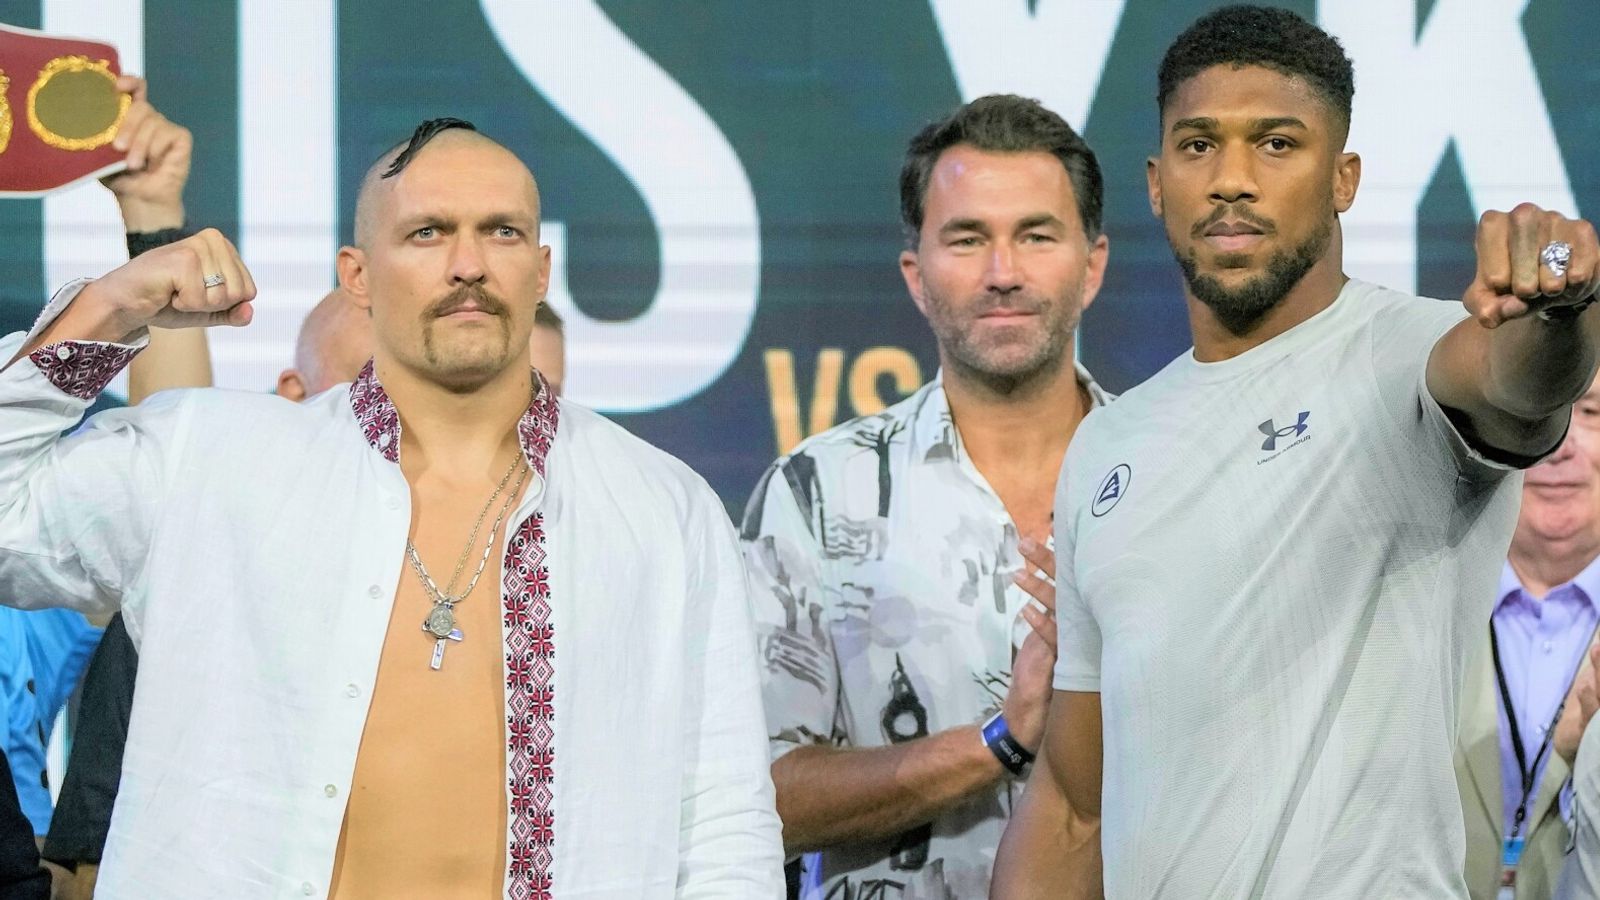 Usyk vs AJ: Predictions from boxing experts ahead of huge Oleksandr Usyk vs Anthony Joshua rematch